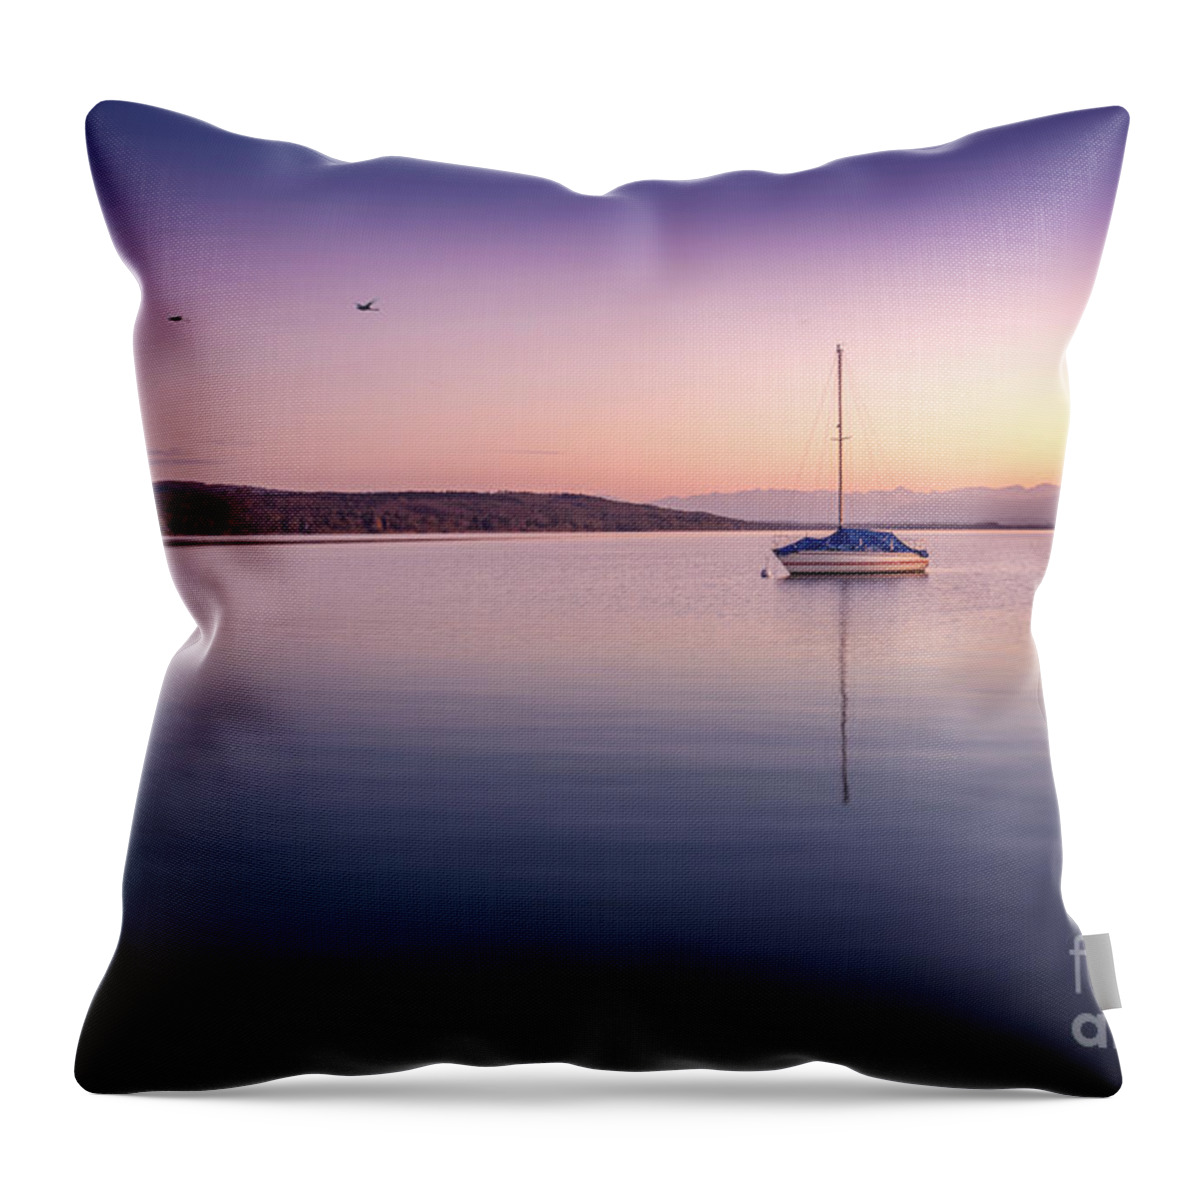 Ammersee Throw Pillow featuring the photograph A Fragile Moment by Hannes Cmarits